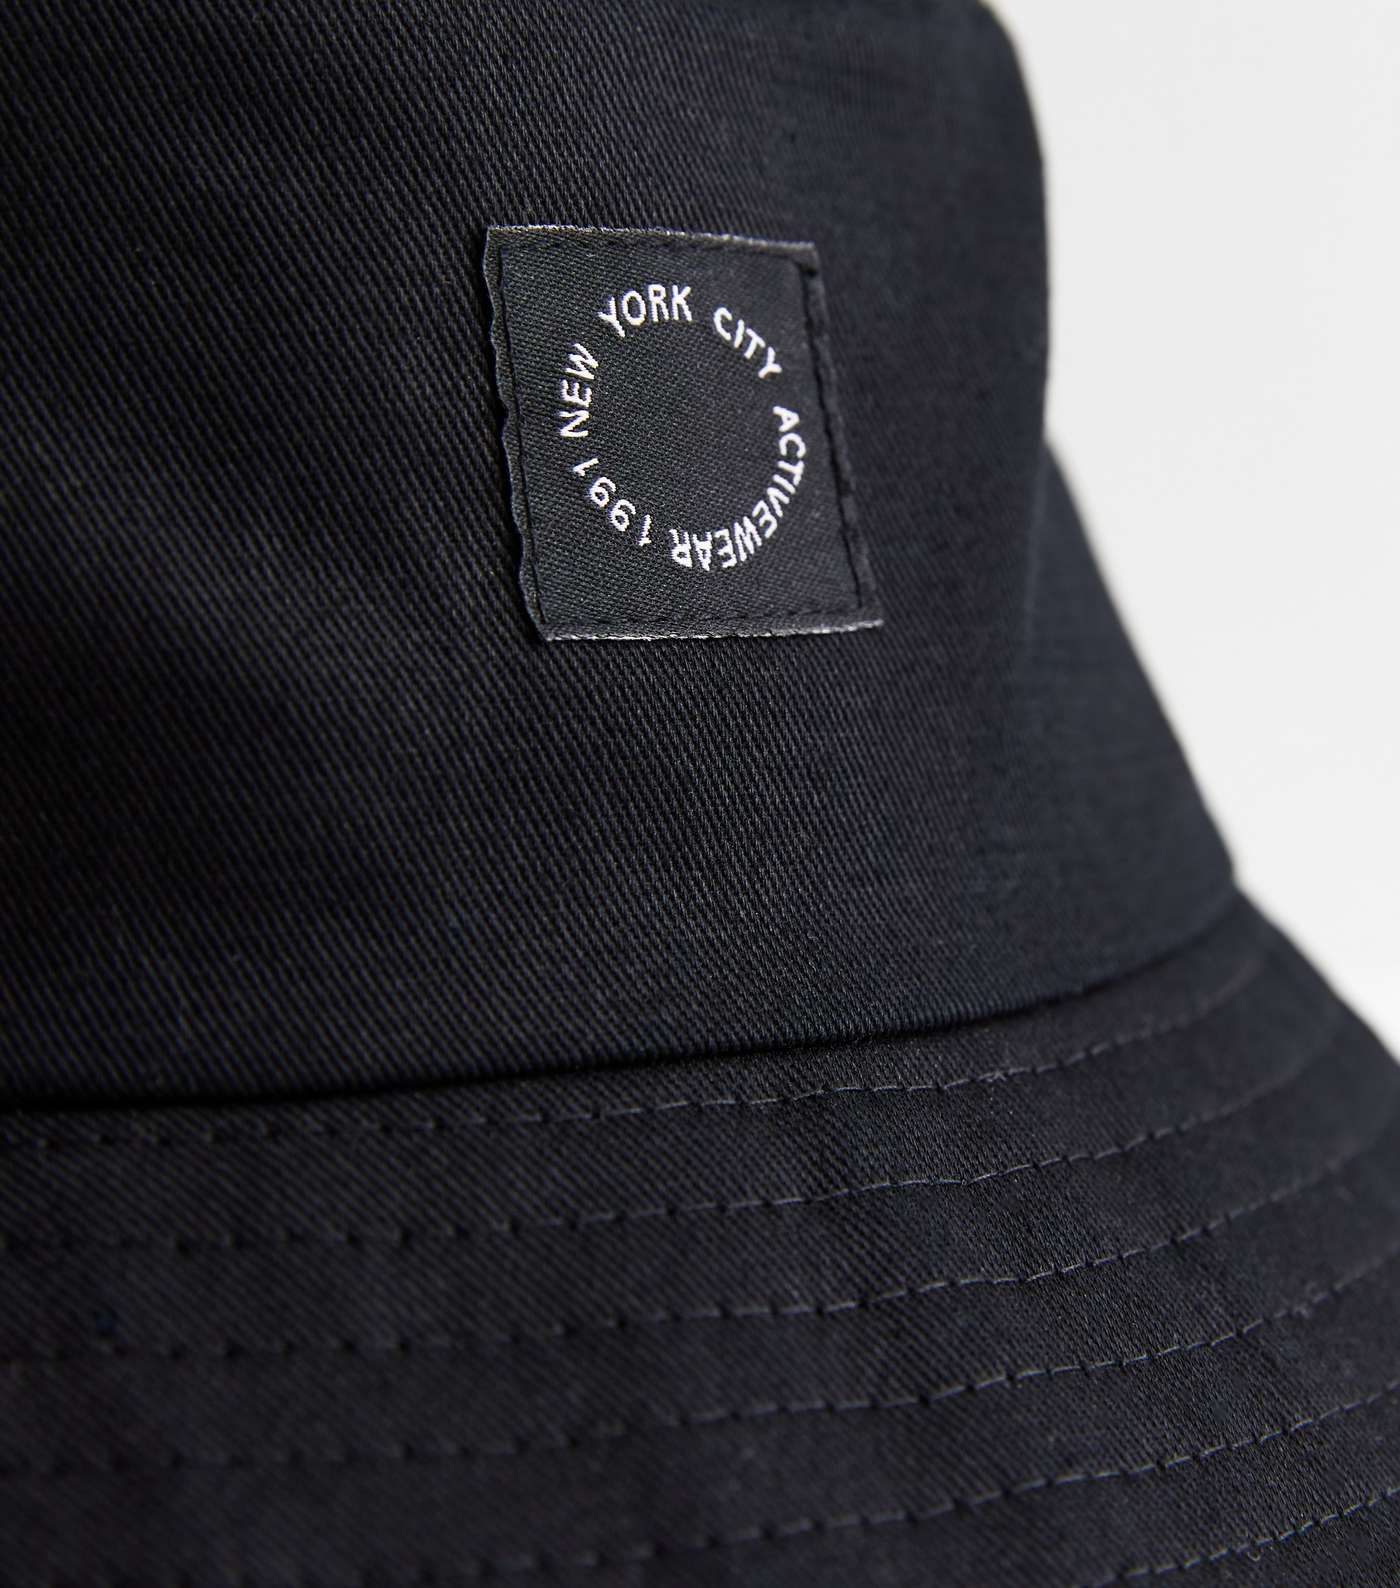 Black Embroidered New York City Bucket Hat Image 3